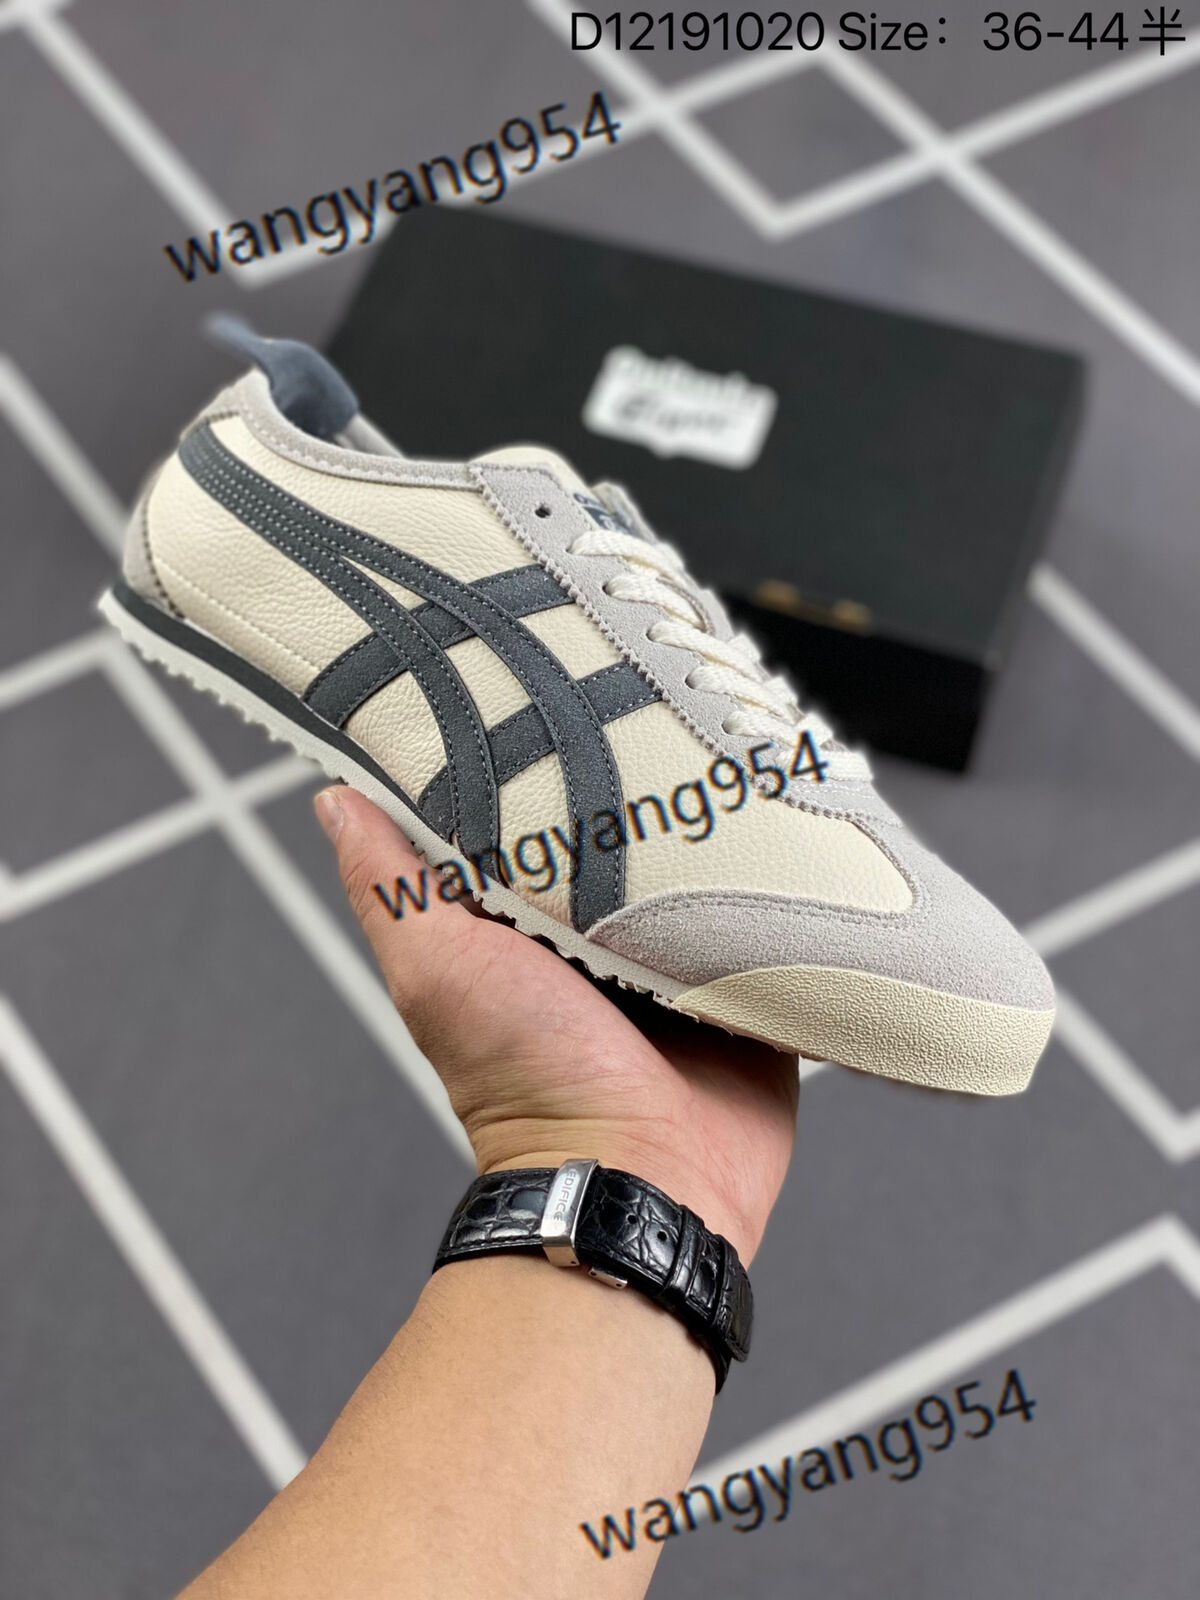 Classic Unisex Onitsuka Tiger MEXICO 66 Shoes Beige/Grey Women Men Sneakers